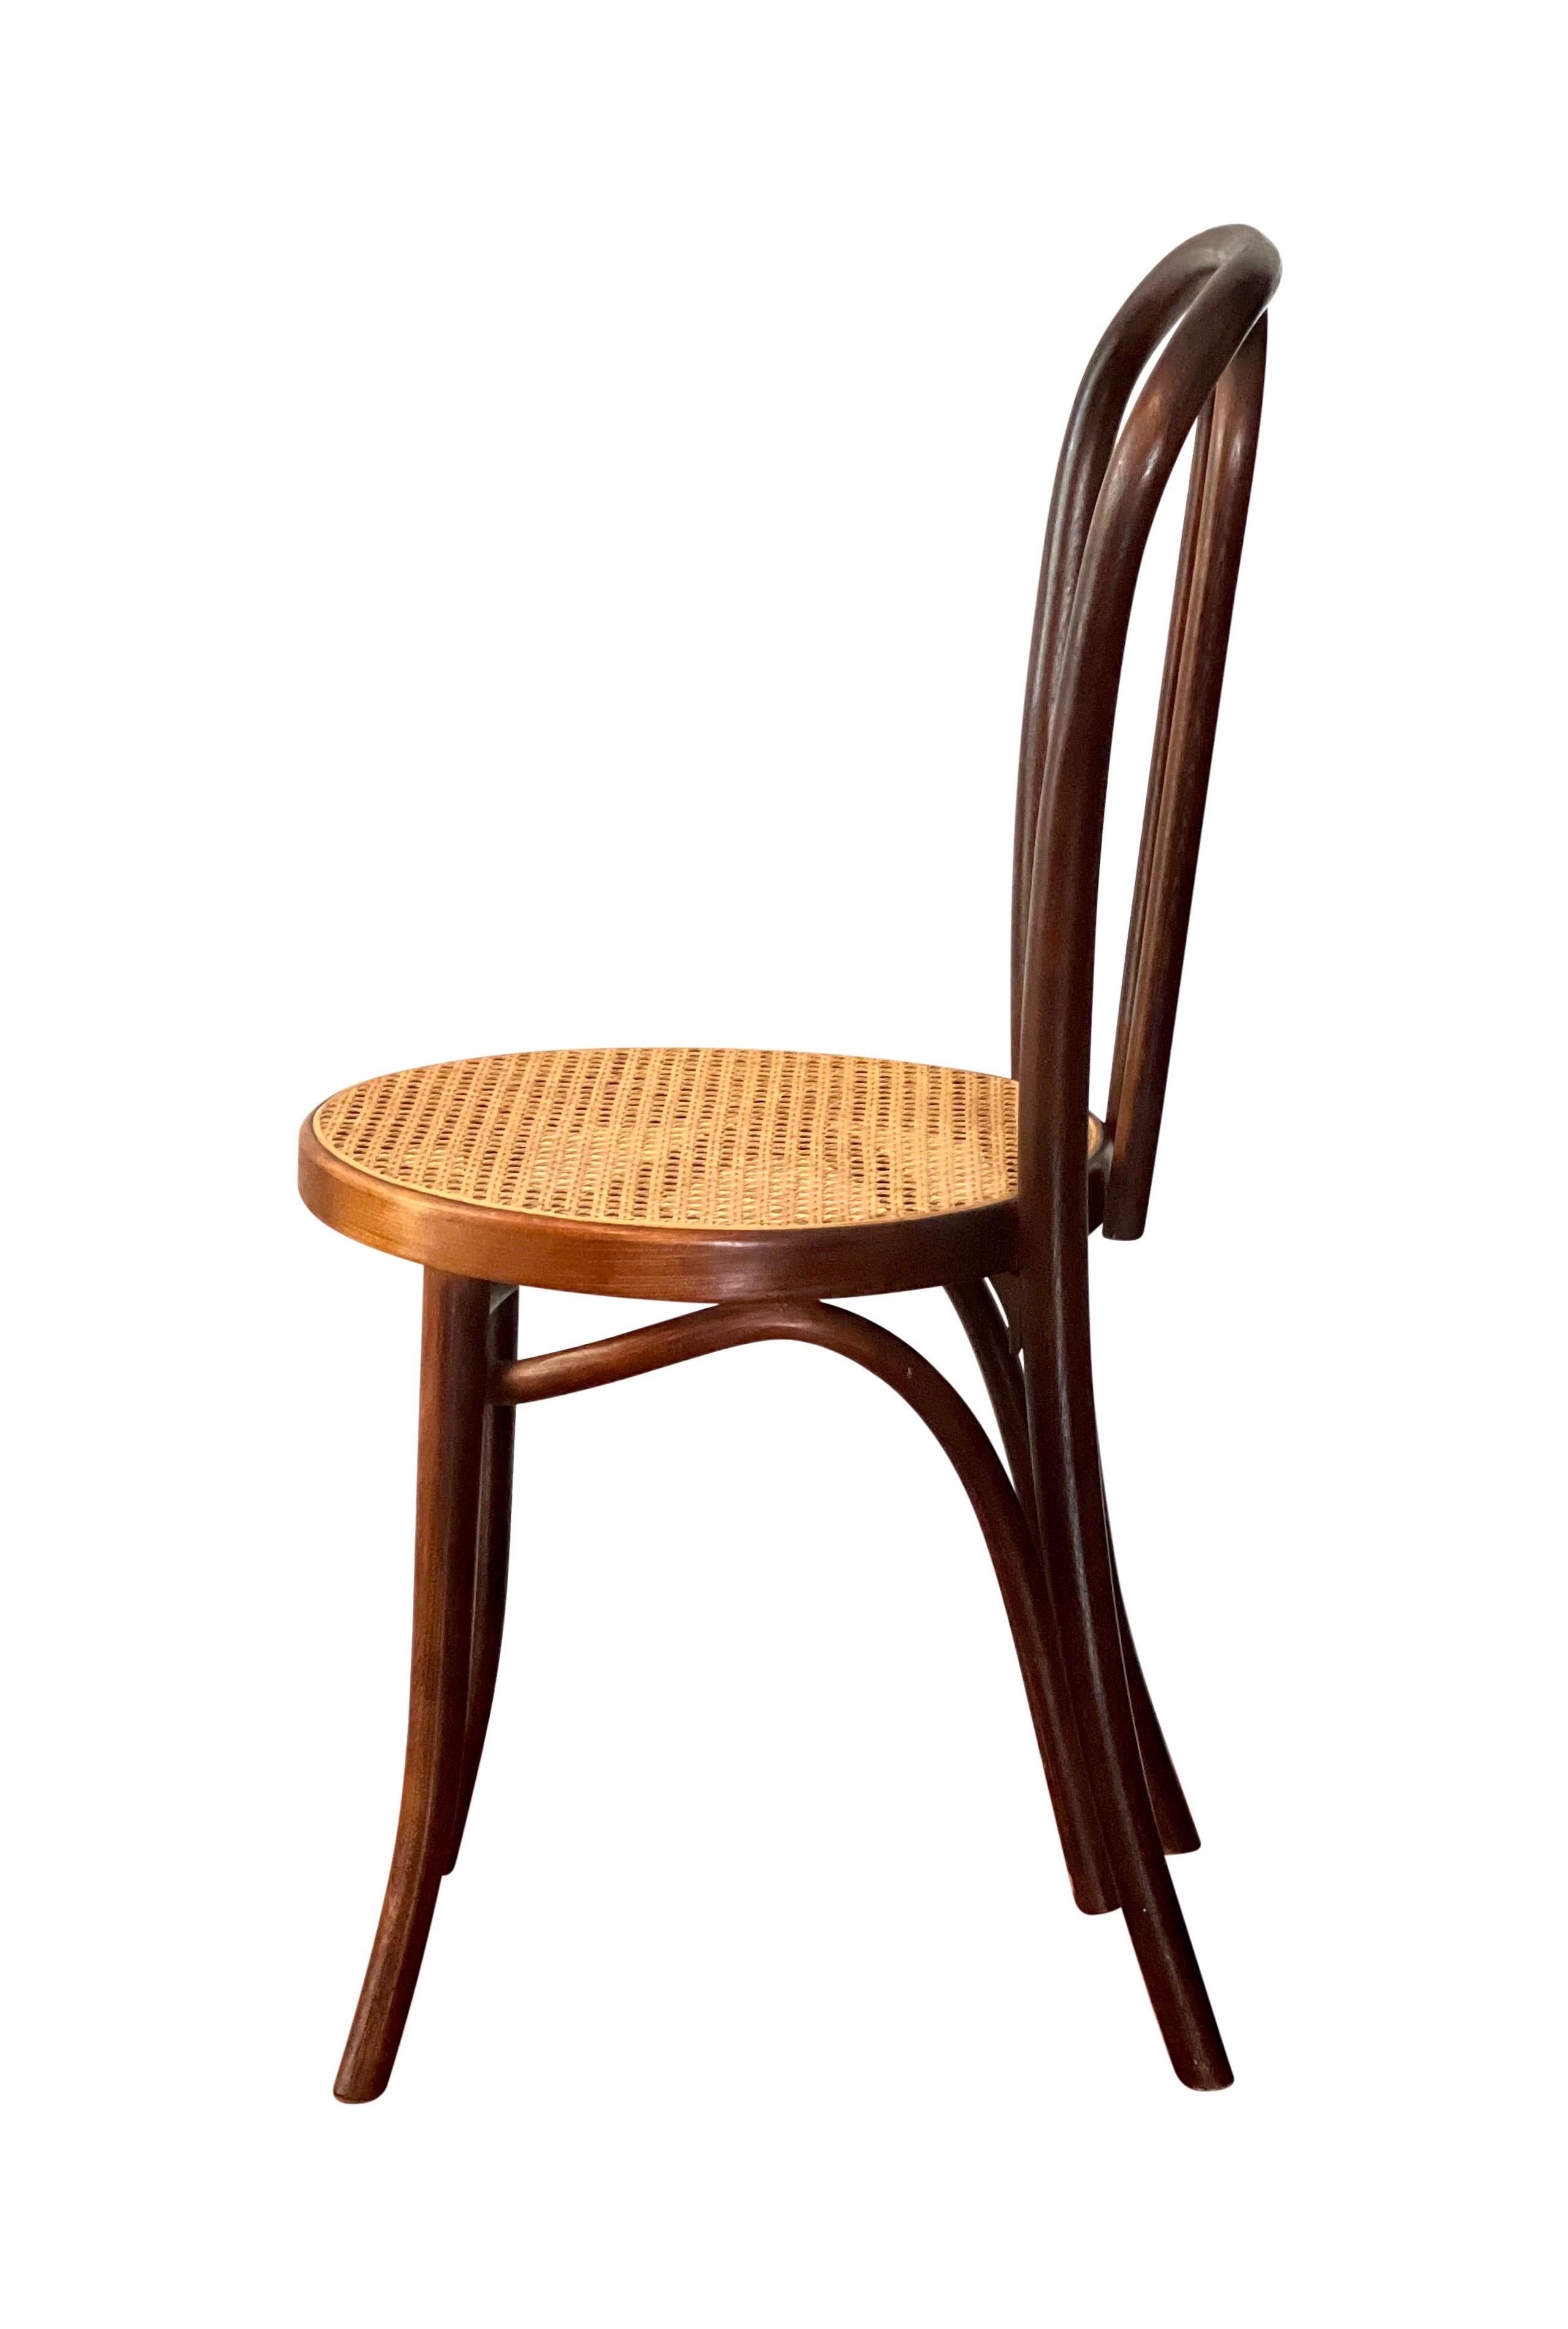 Bauhaus Thonet Bentwood Cane Bistro or Side Chair, 1920's For Sale